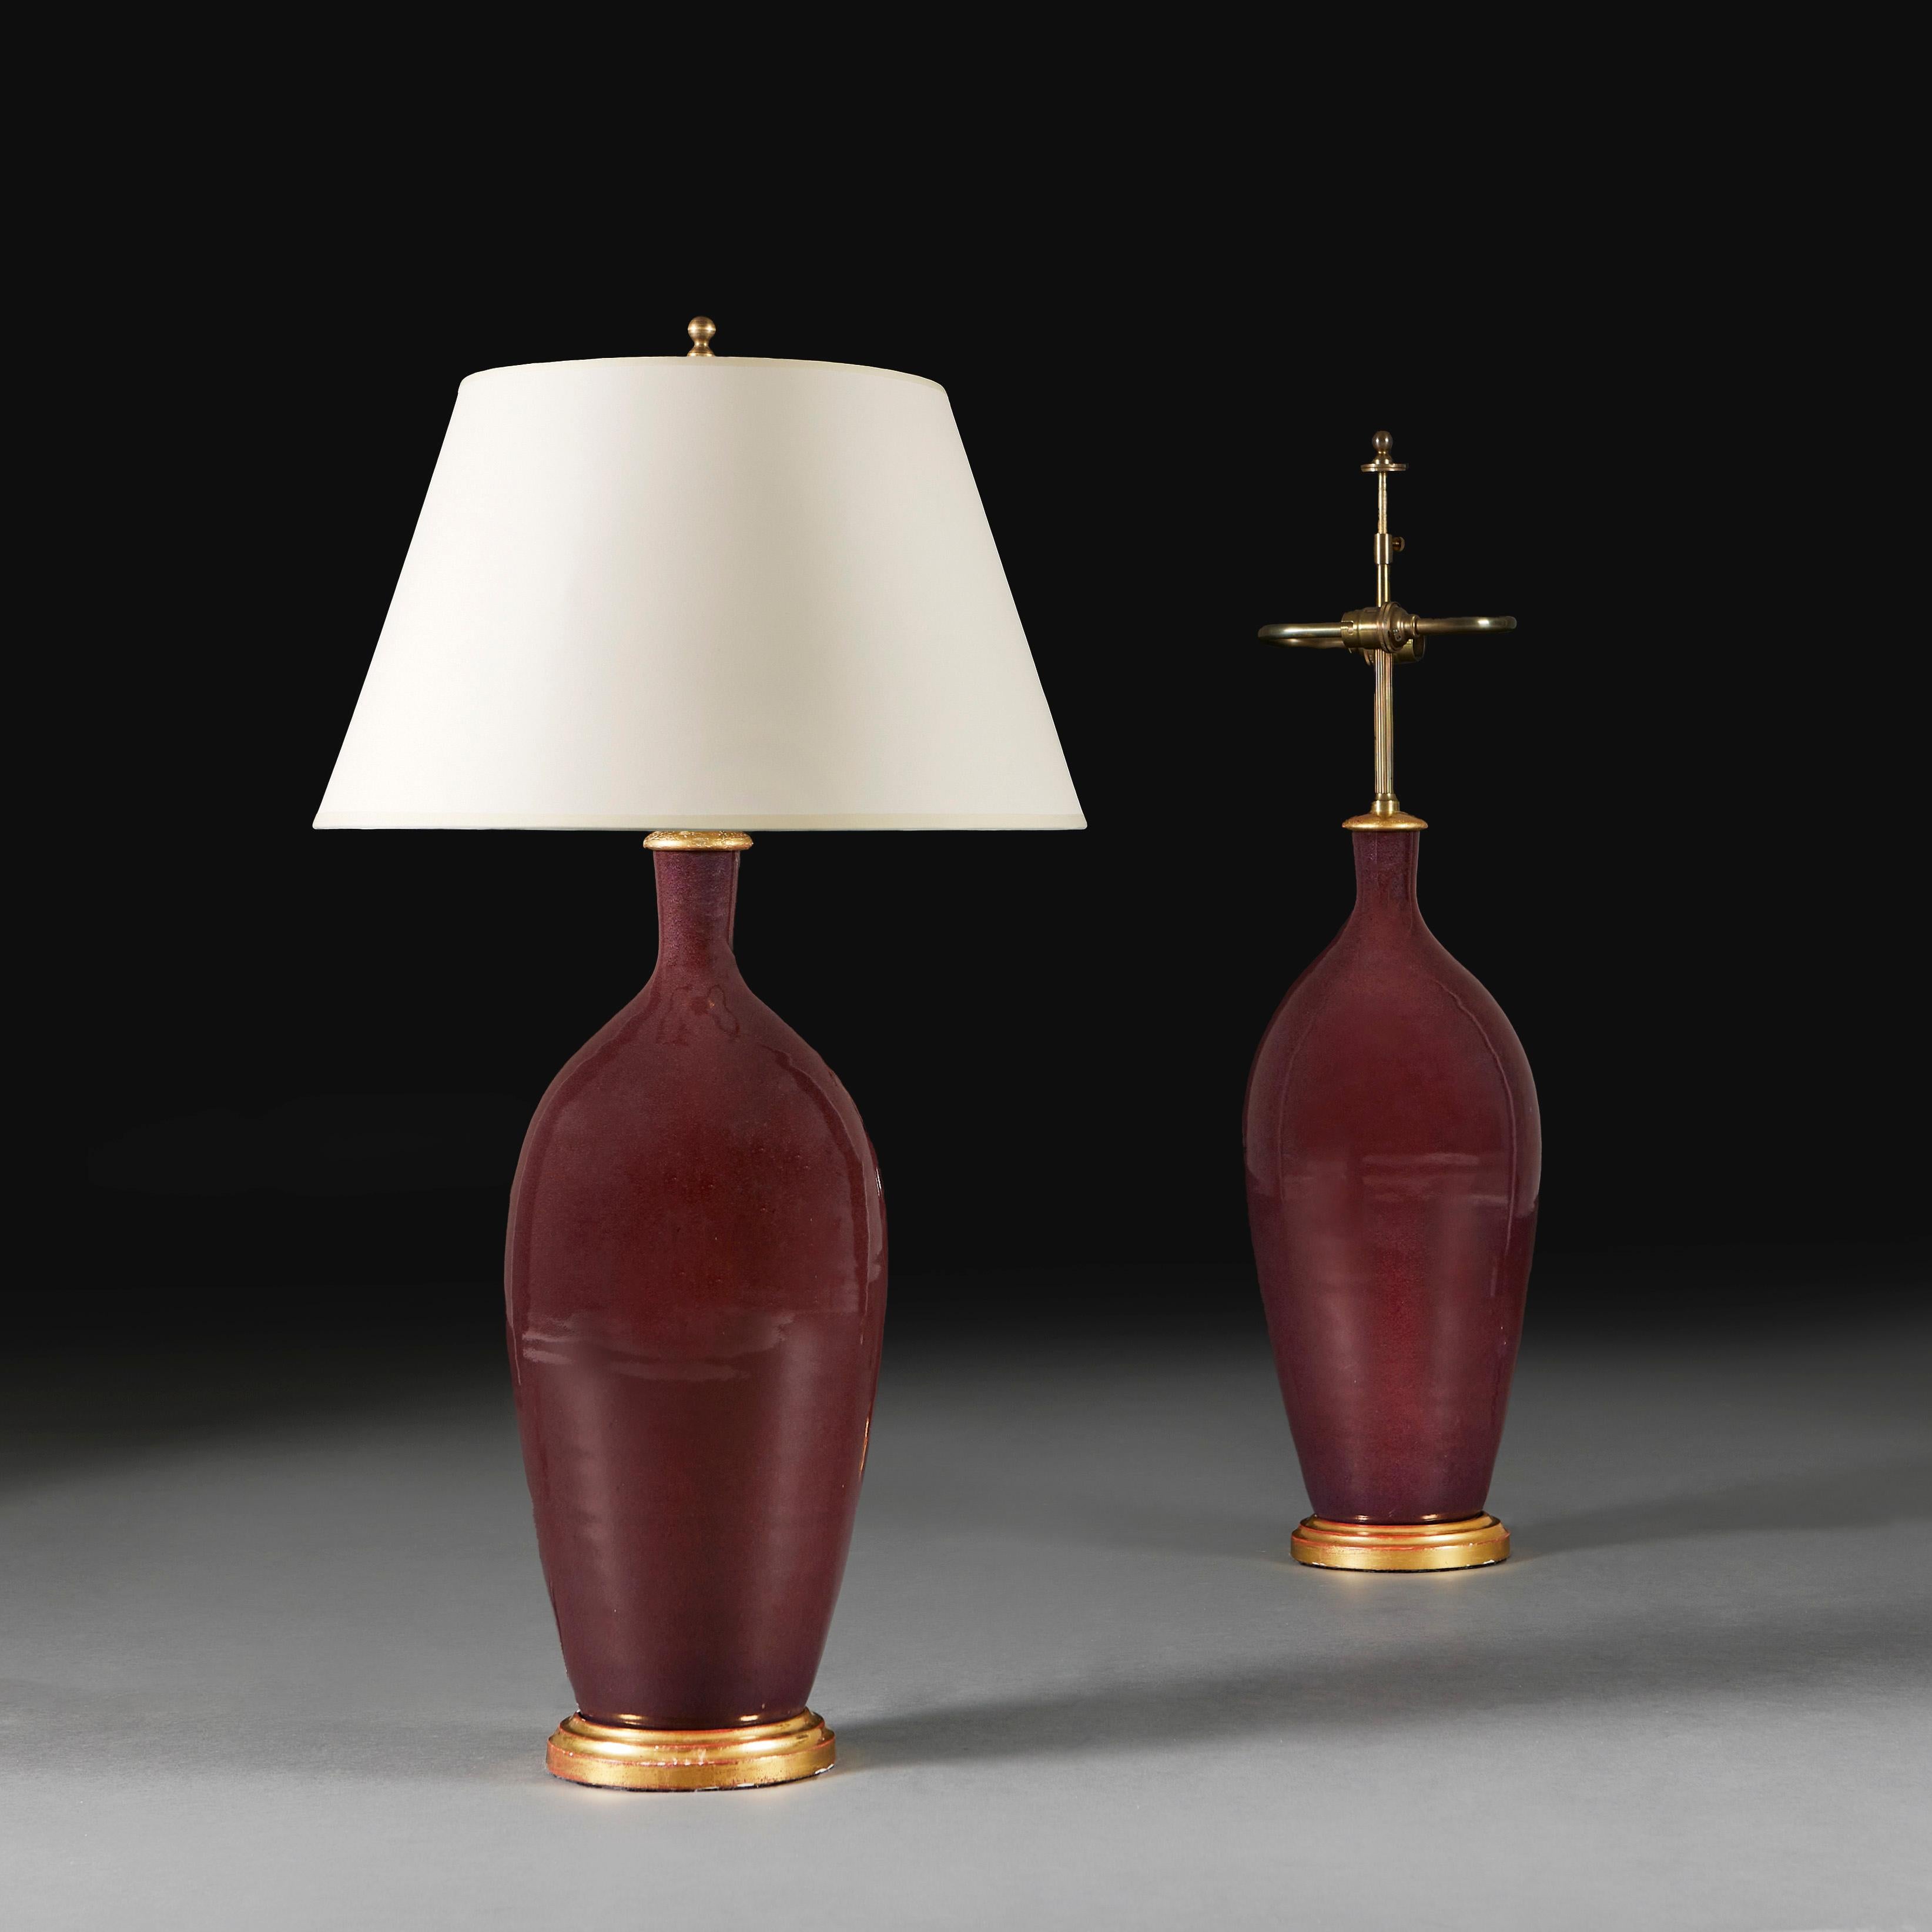 A fine pair of large flambe vessels incised with the initials RS to the rear, for Rupert Spira, now converted as lamps with giltwood bases. 

Rupert Spira was born in London in 1960. He earned his degree at West Surrey College of Art and later on